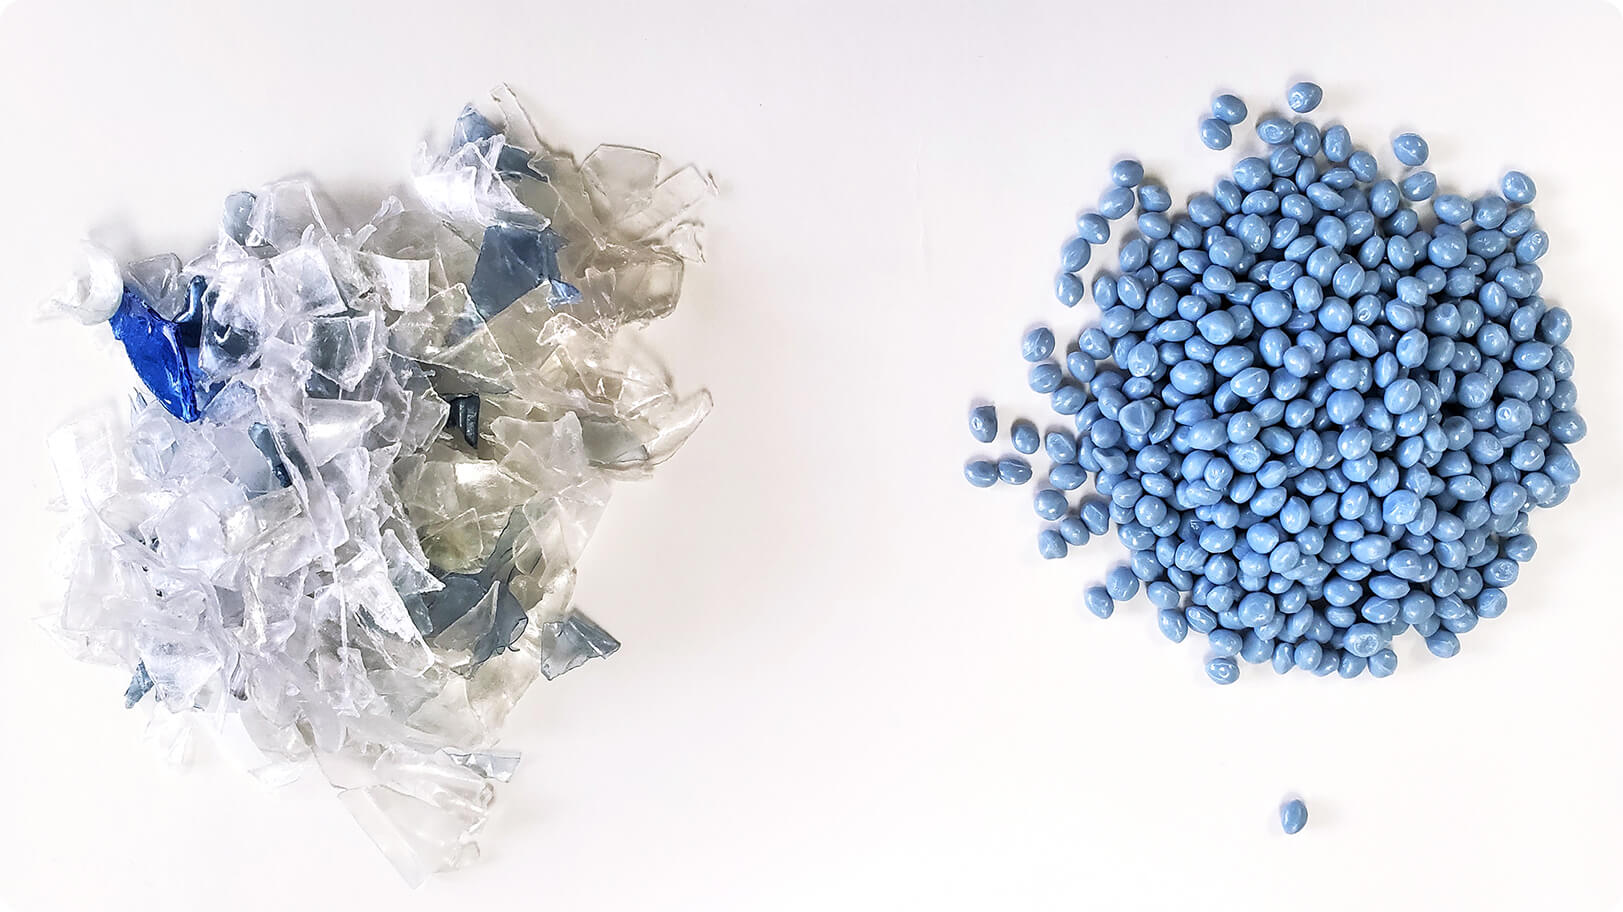 Recycled plastic in 2 forms. Blue pellets and clear shredded plastic